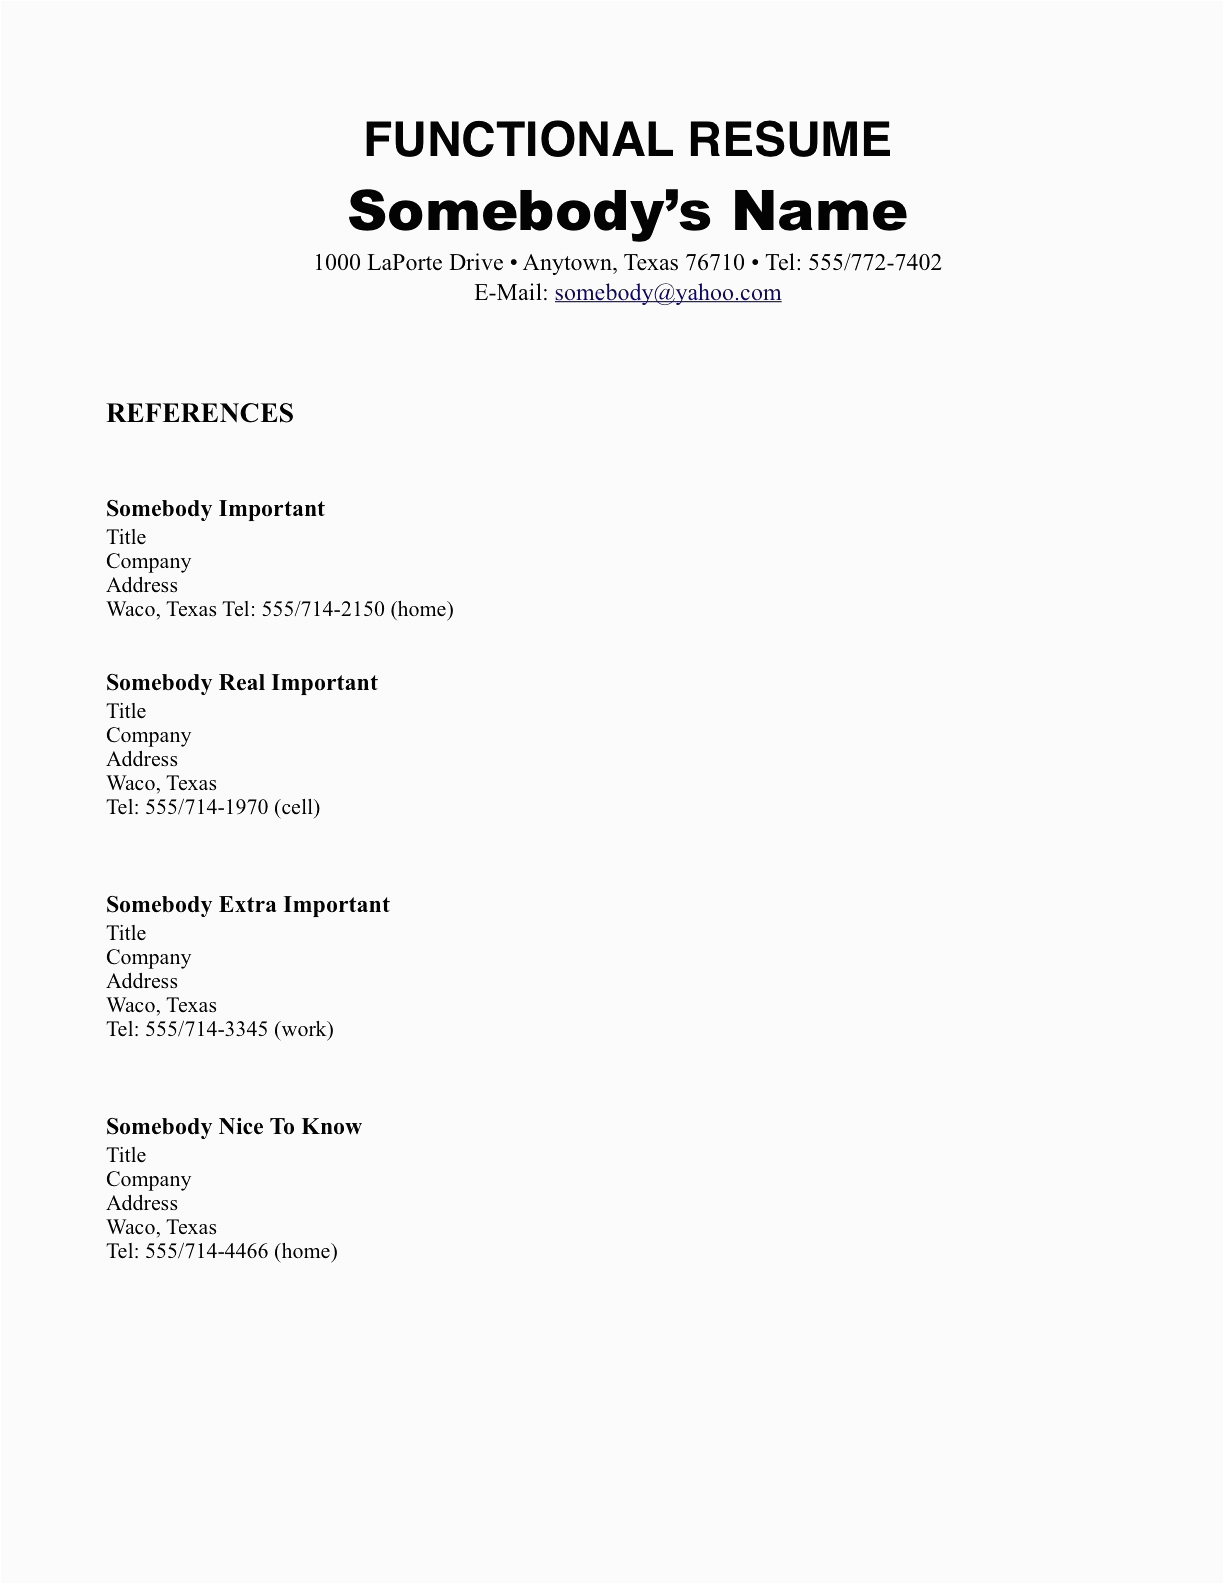 12 13 functional resume college student